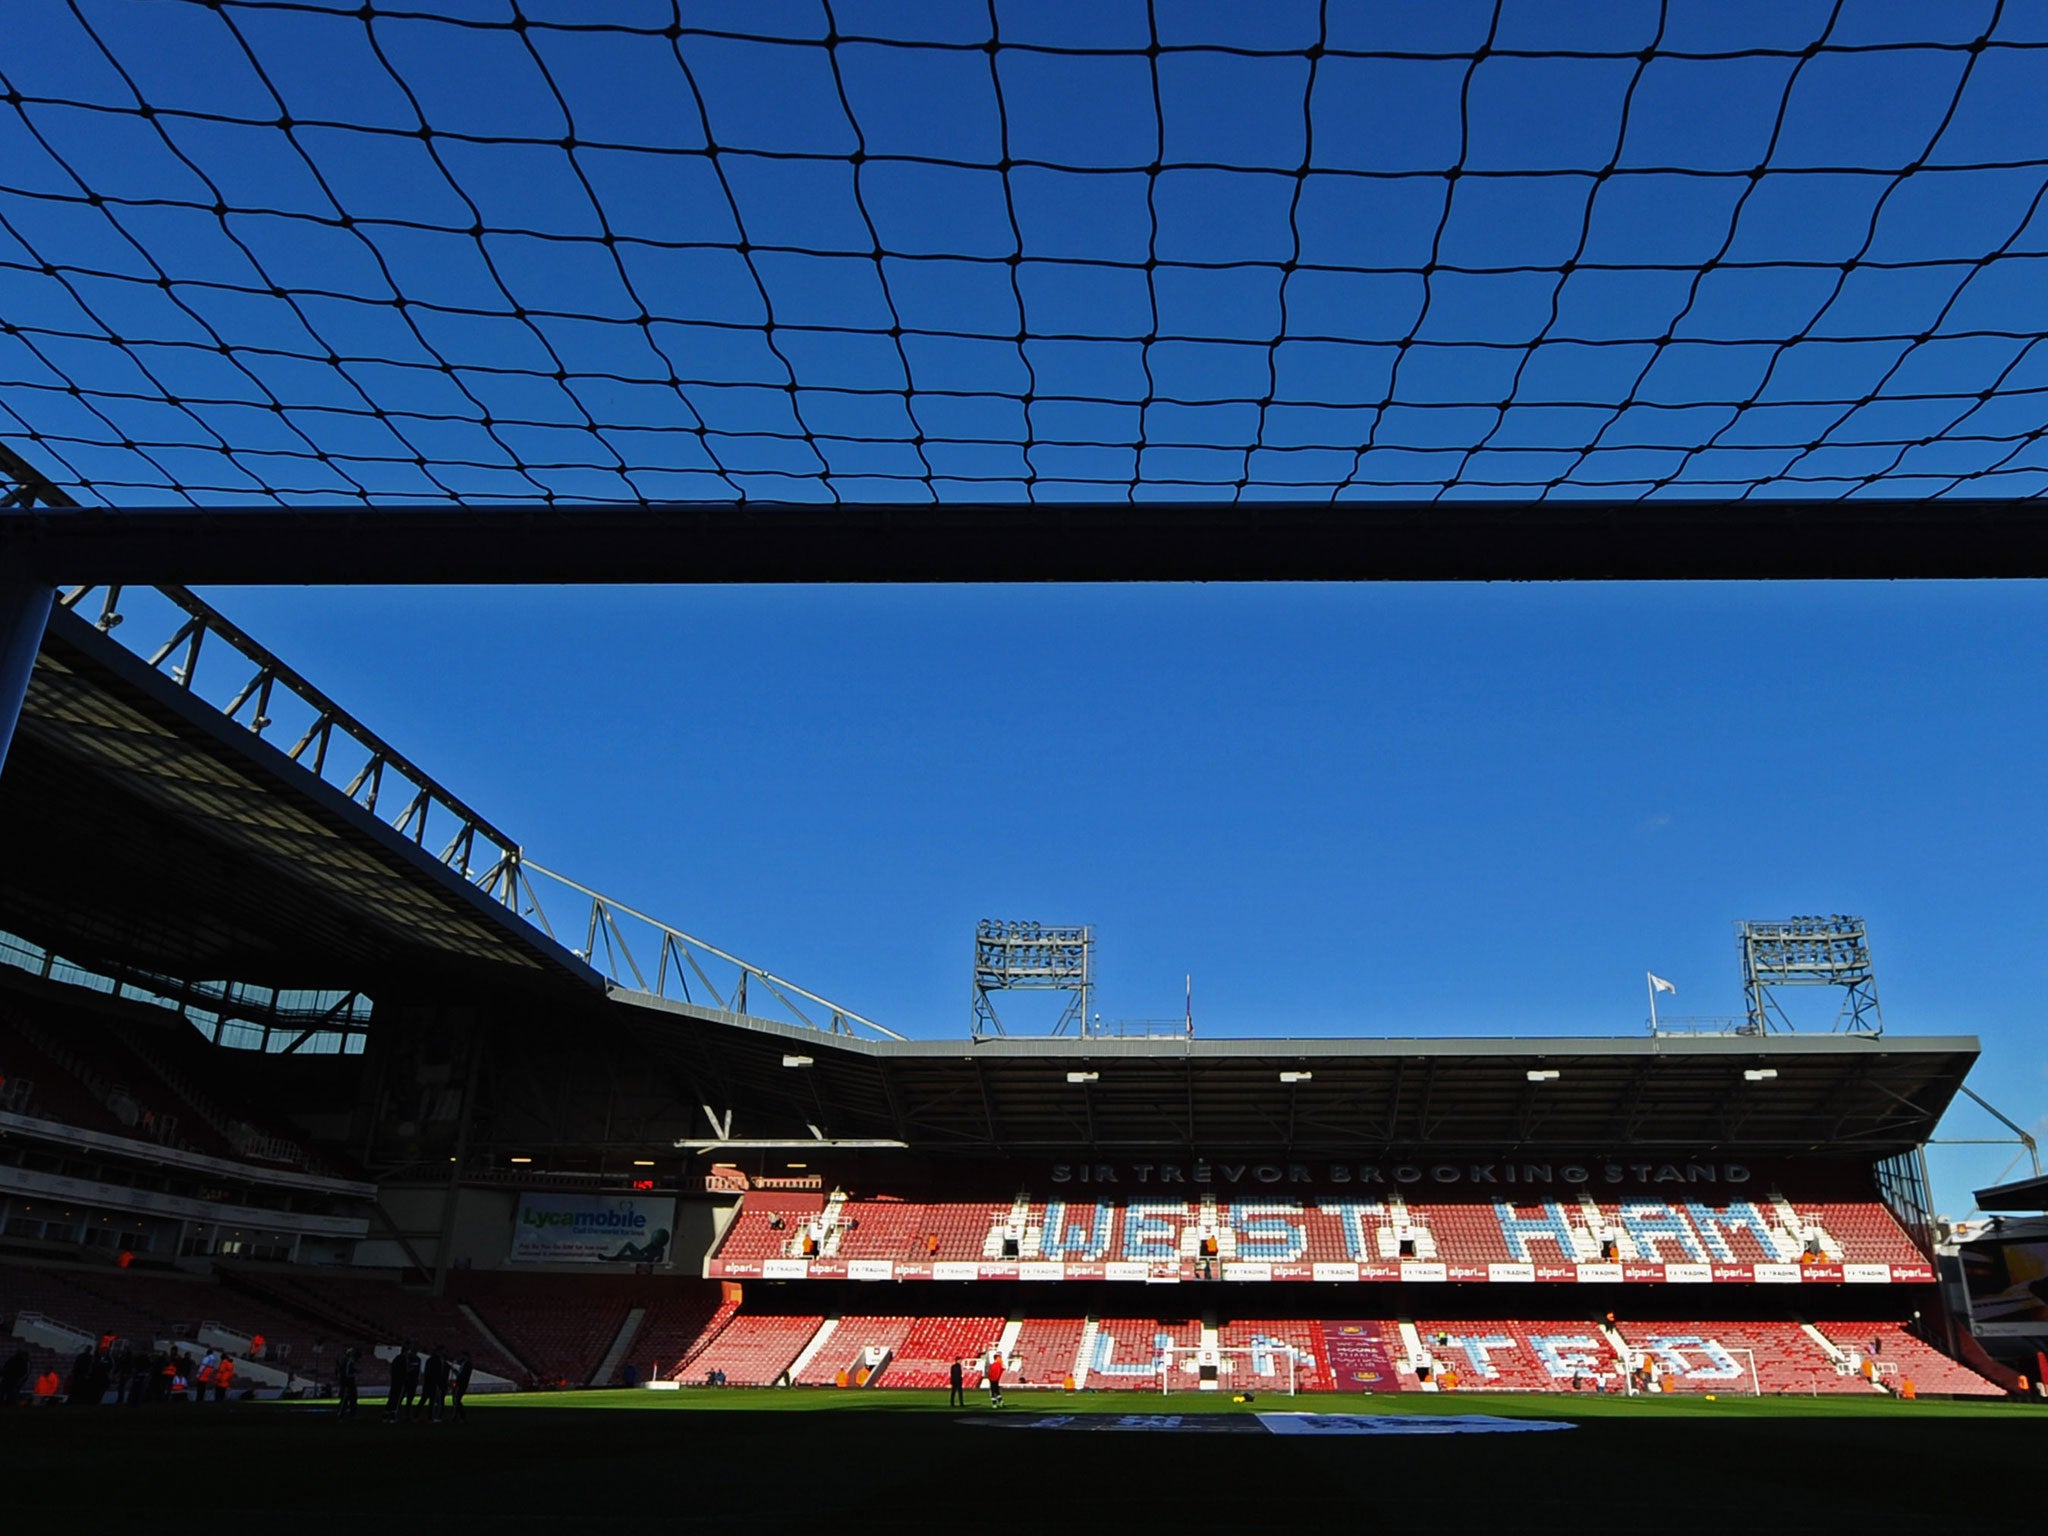 West Ham's Upton Park will be converted into a 700-home East End 'village' after the club agreed to sell the ground